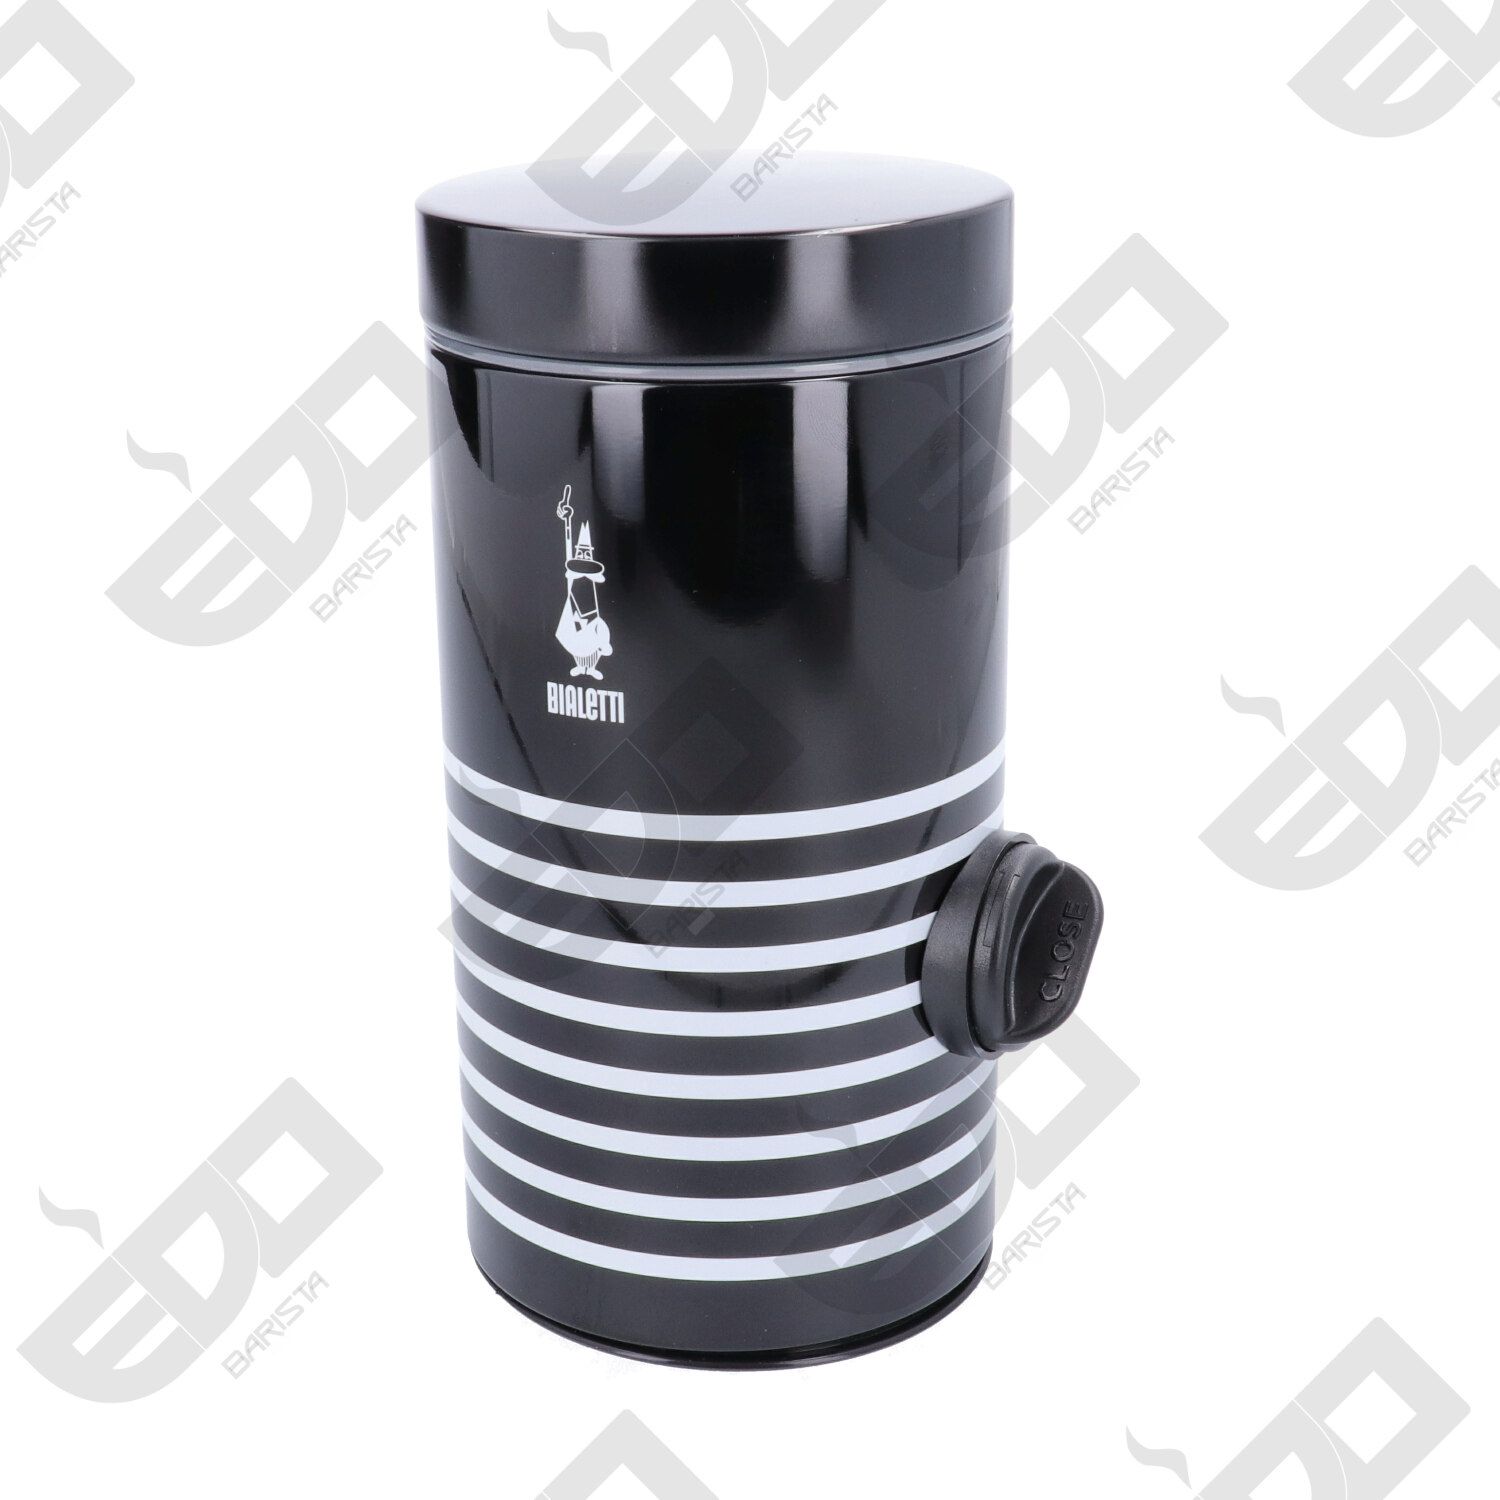 Store your moka coffee in the right way with the Bialetti Jar